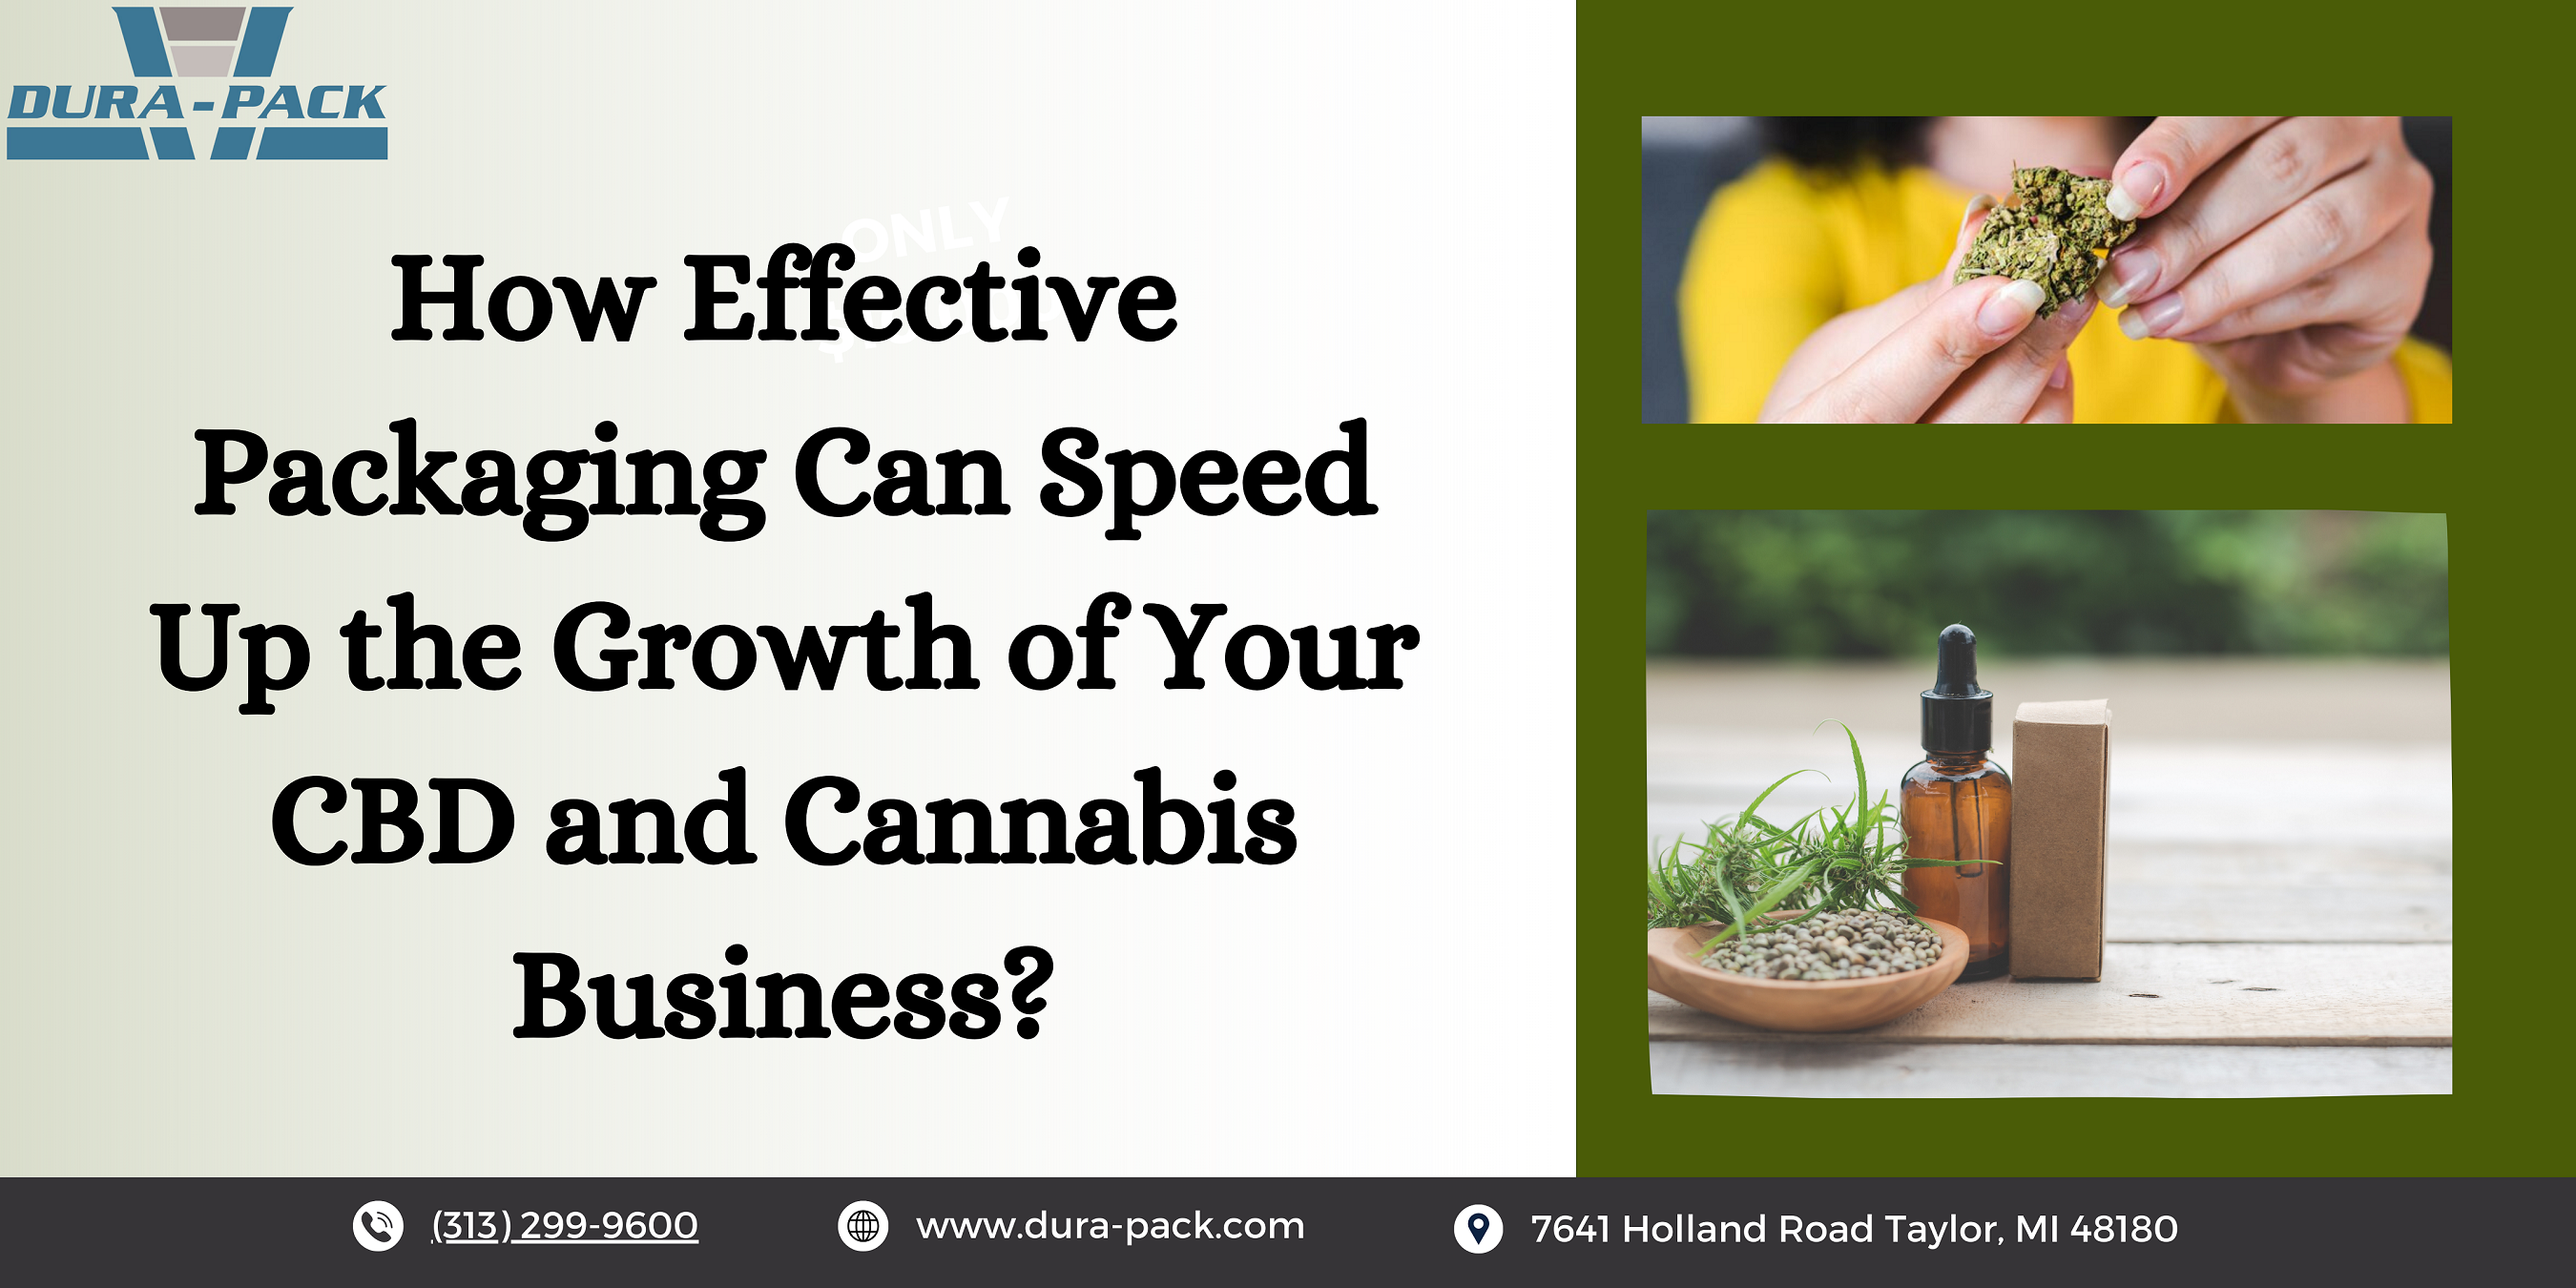 How Effective Packaging Can Speed Up the Growth of Your CBD and Cannabis Business?